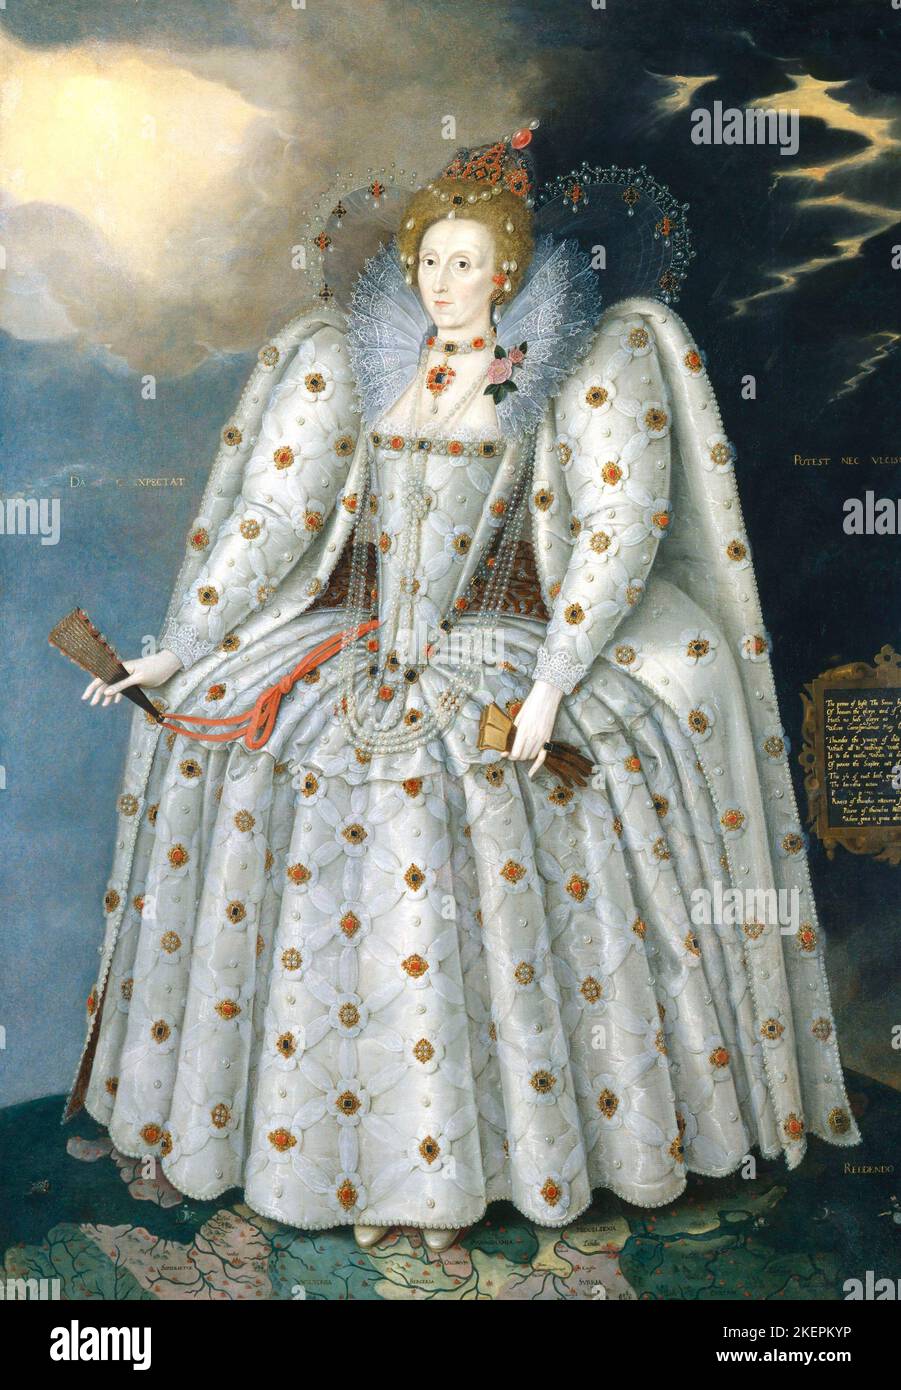 Queen Elizabeth I ('The Ditchley portrait') by Marcus Gheeraerts the Younger Portrait of Elisabeth Called The Ditchley Portrait 1592 Stock Photo